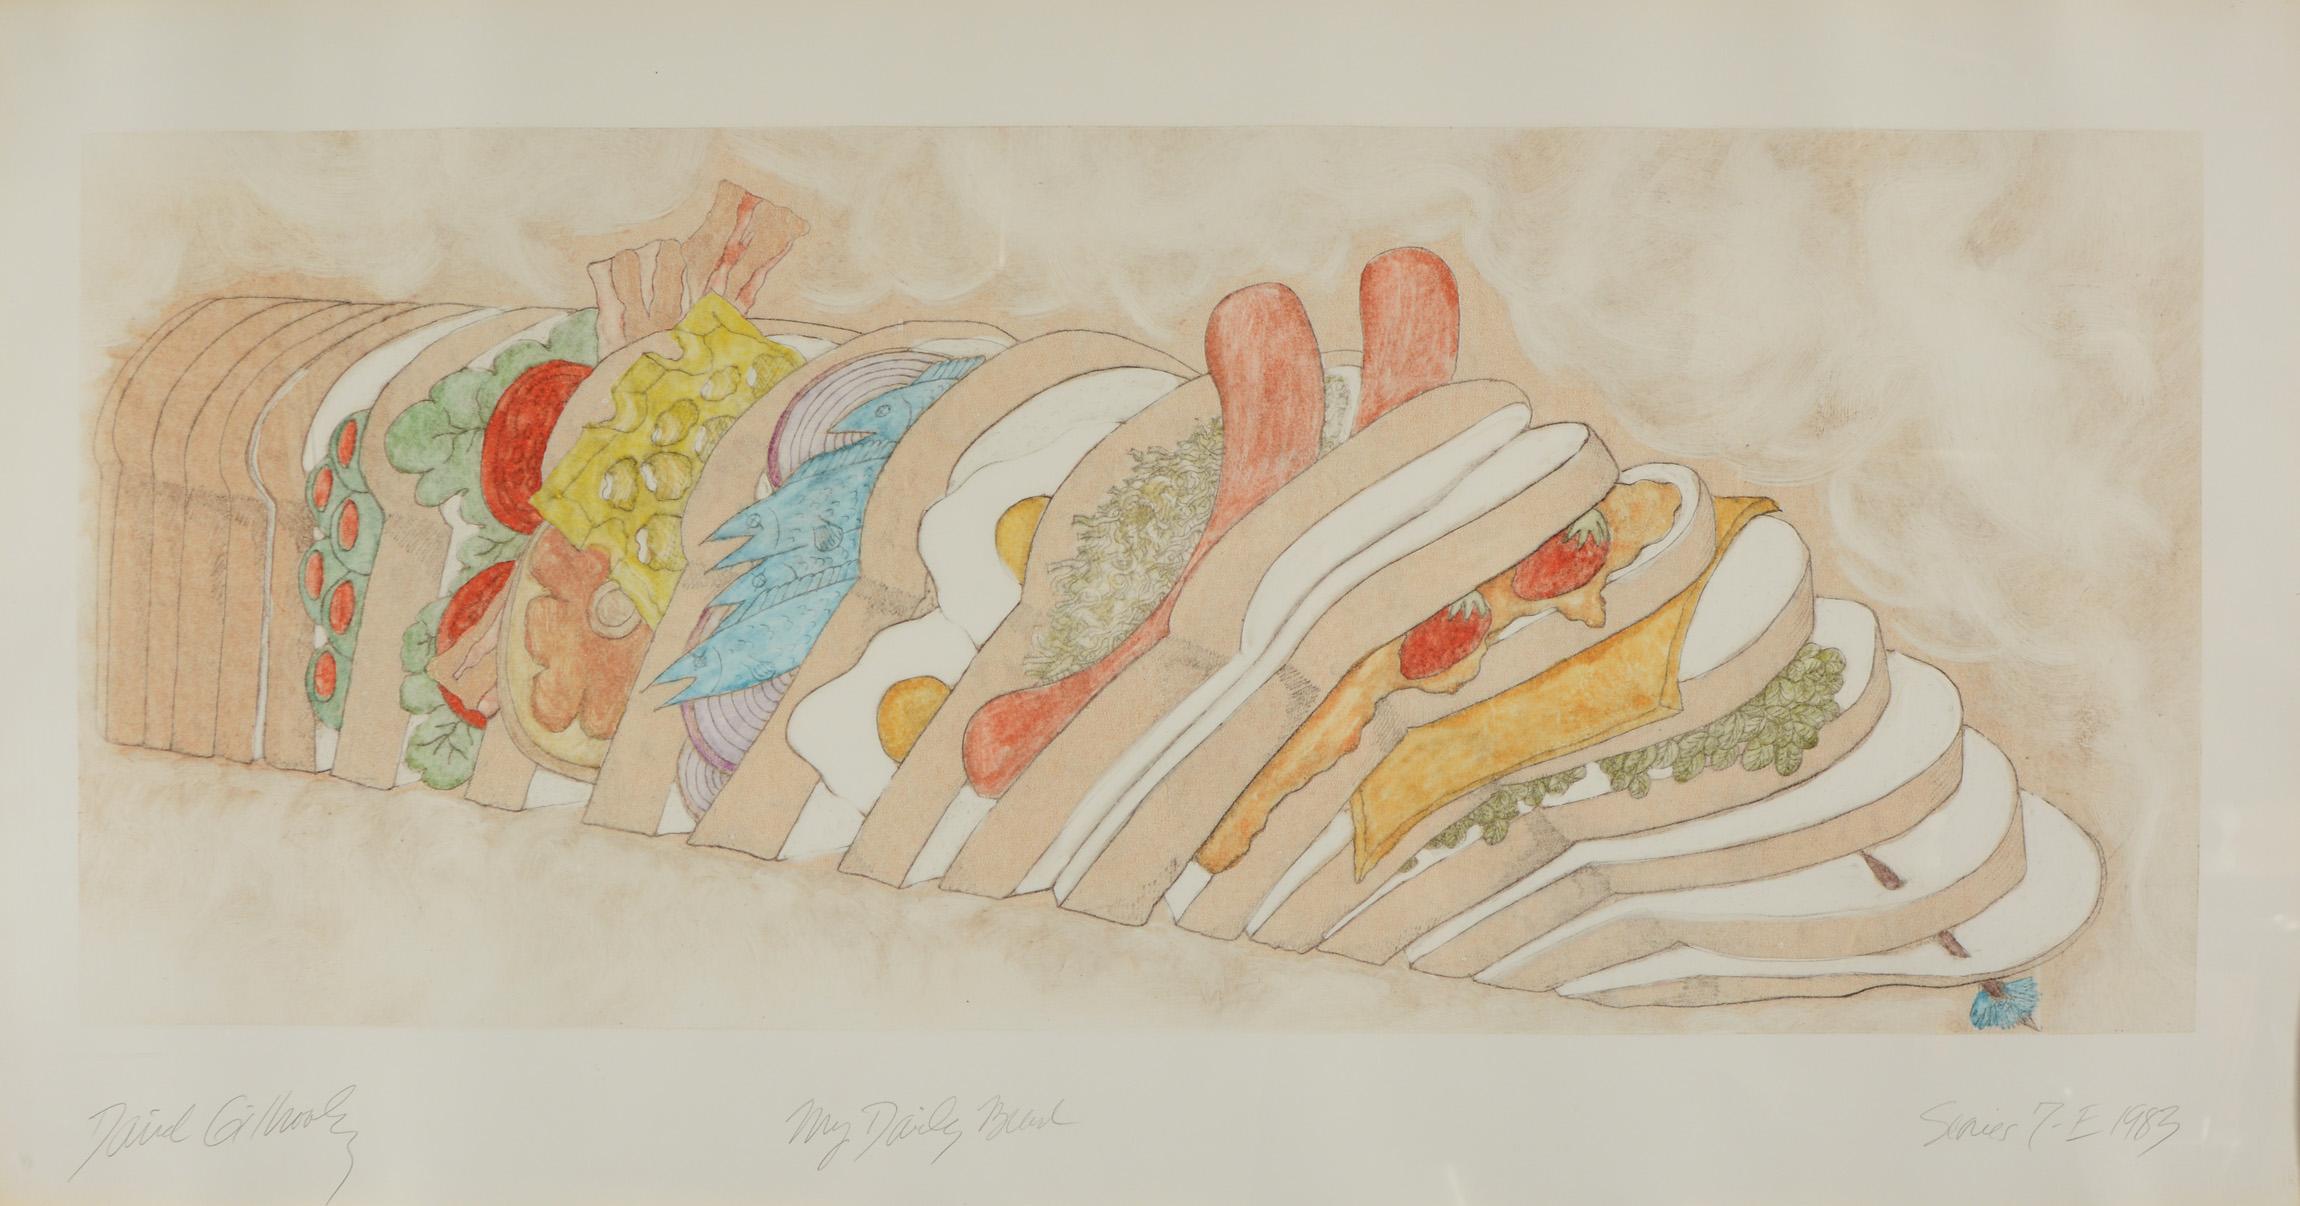 Hand colored print titled My Daily Bread by David Gilhooly (1943-2013). The print is dated 1983 and was published by 3EP Ltd. This was probably framed at the time the print was made. It has not been examined out of the frame. There is a small spot